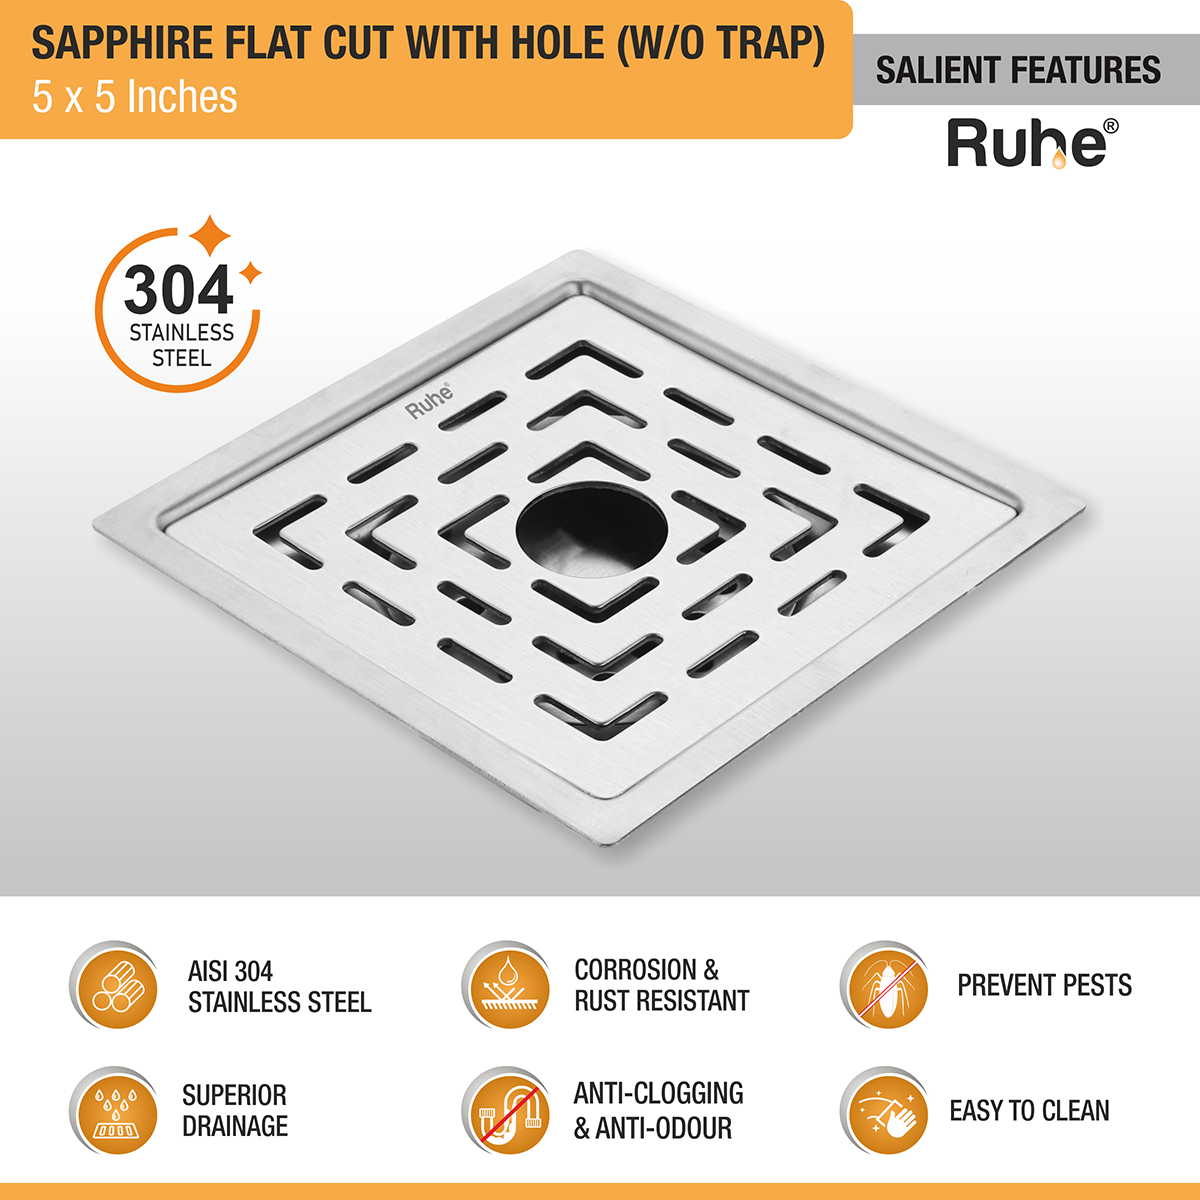 Sapphire Square Flat Cut 304-Grade Floor Drain with Hole (5 x 5 Inches) features and benefits